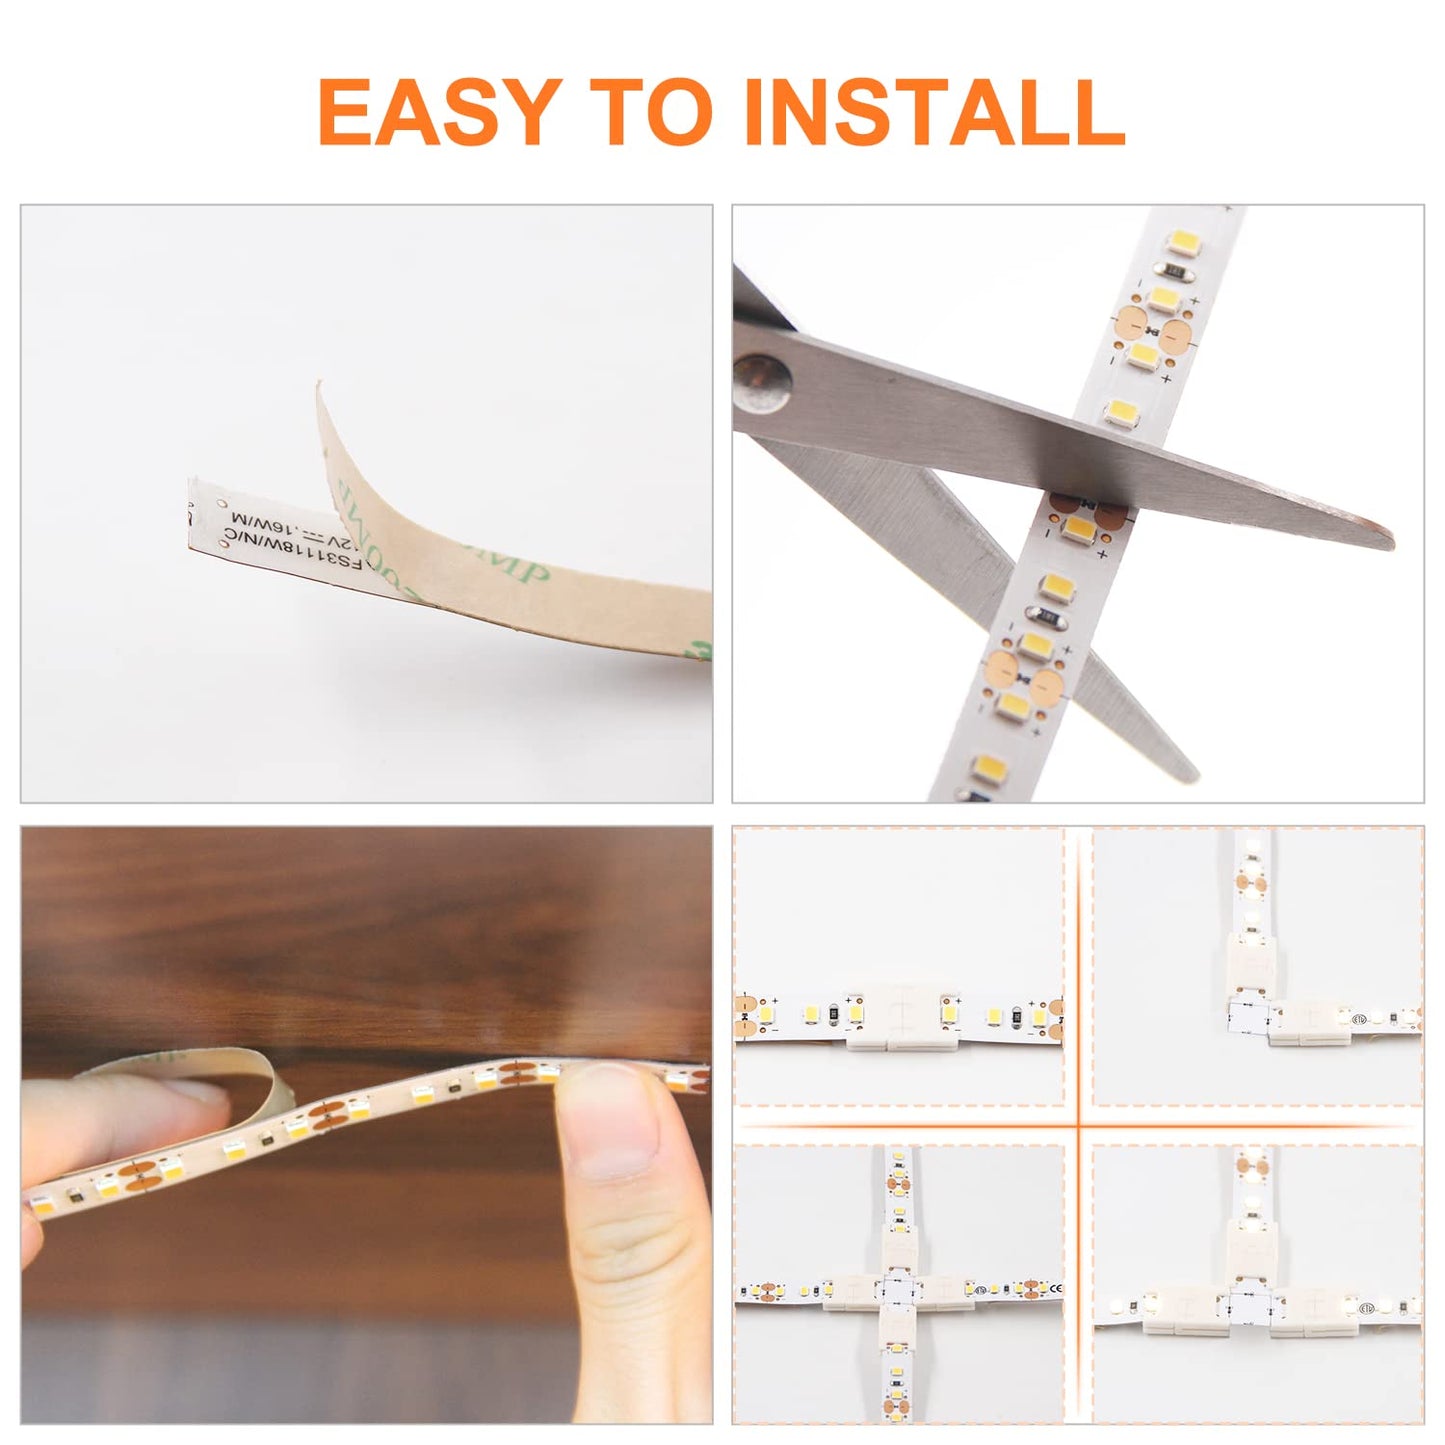 FS31 LED Strip Lights Warm White 120LEDs/m 1000Lm/M 9.6W/M CRI 90+ LED Tape Light 12V 2835 Cuttable Connectable Dimmable LED Strips for Indoor Under Cabinet ETL-Listed,No Driver (2700k, White)